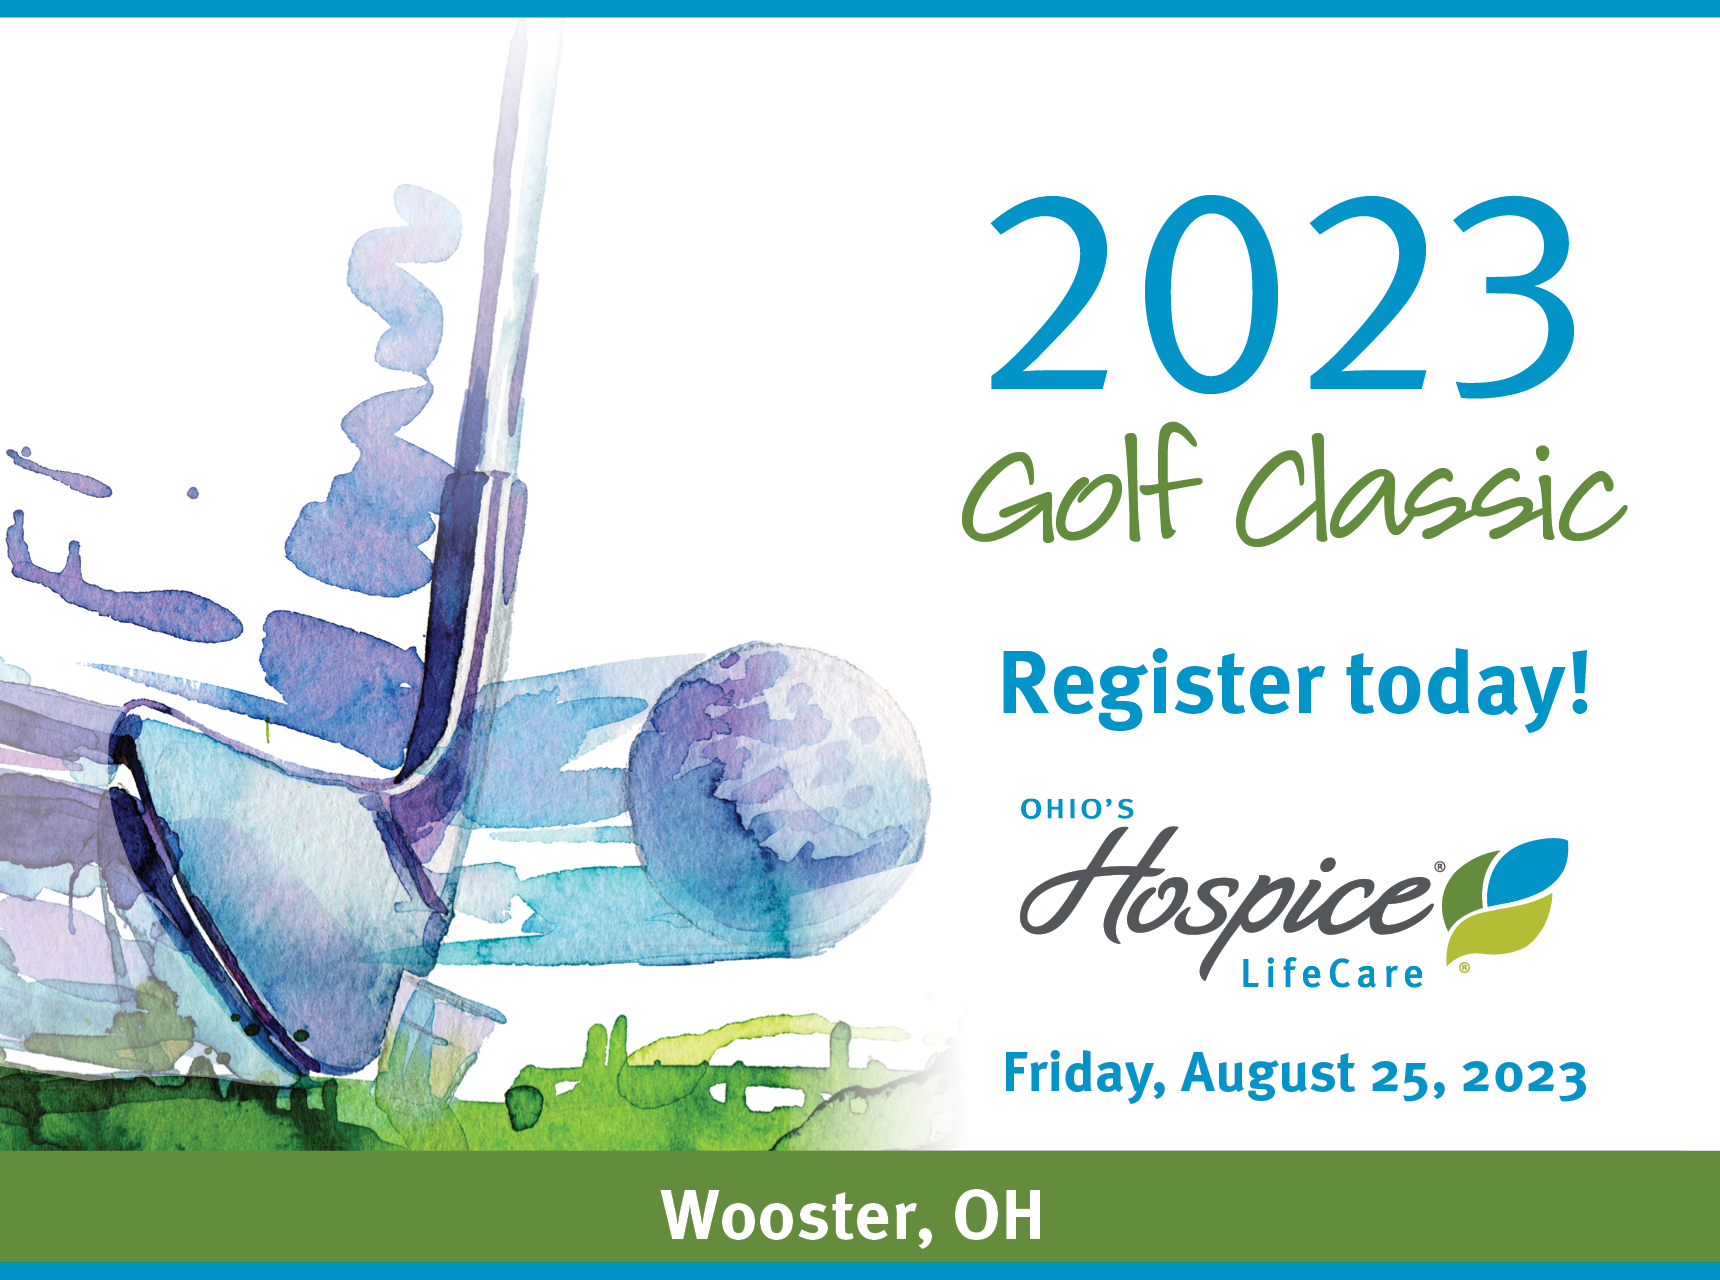 2023 Golf Classic. Register today! Ohio's Hospice LifeCare. Friday, August 25, 2023. Wooster, OH